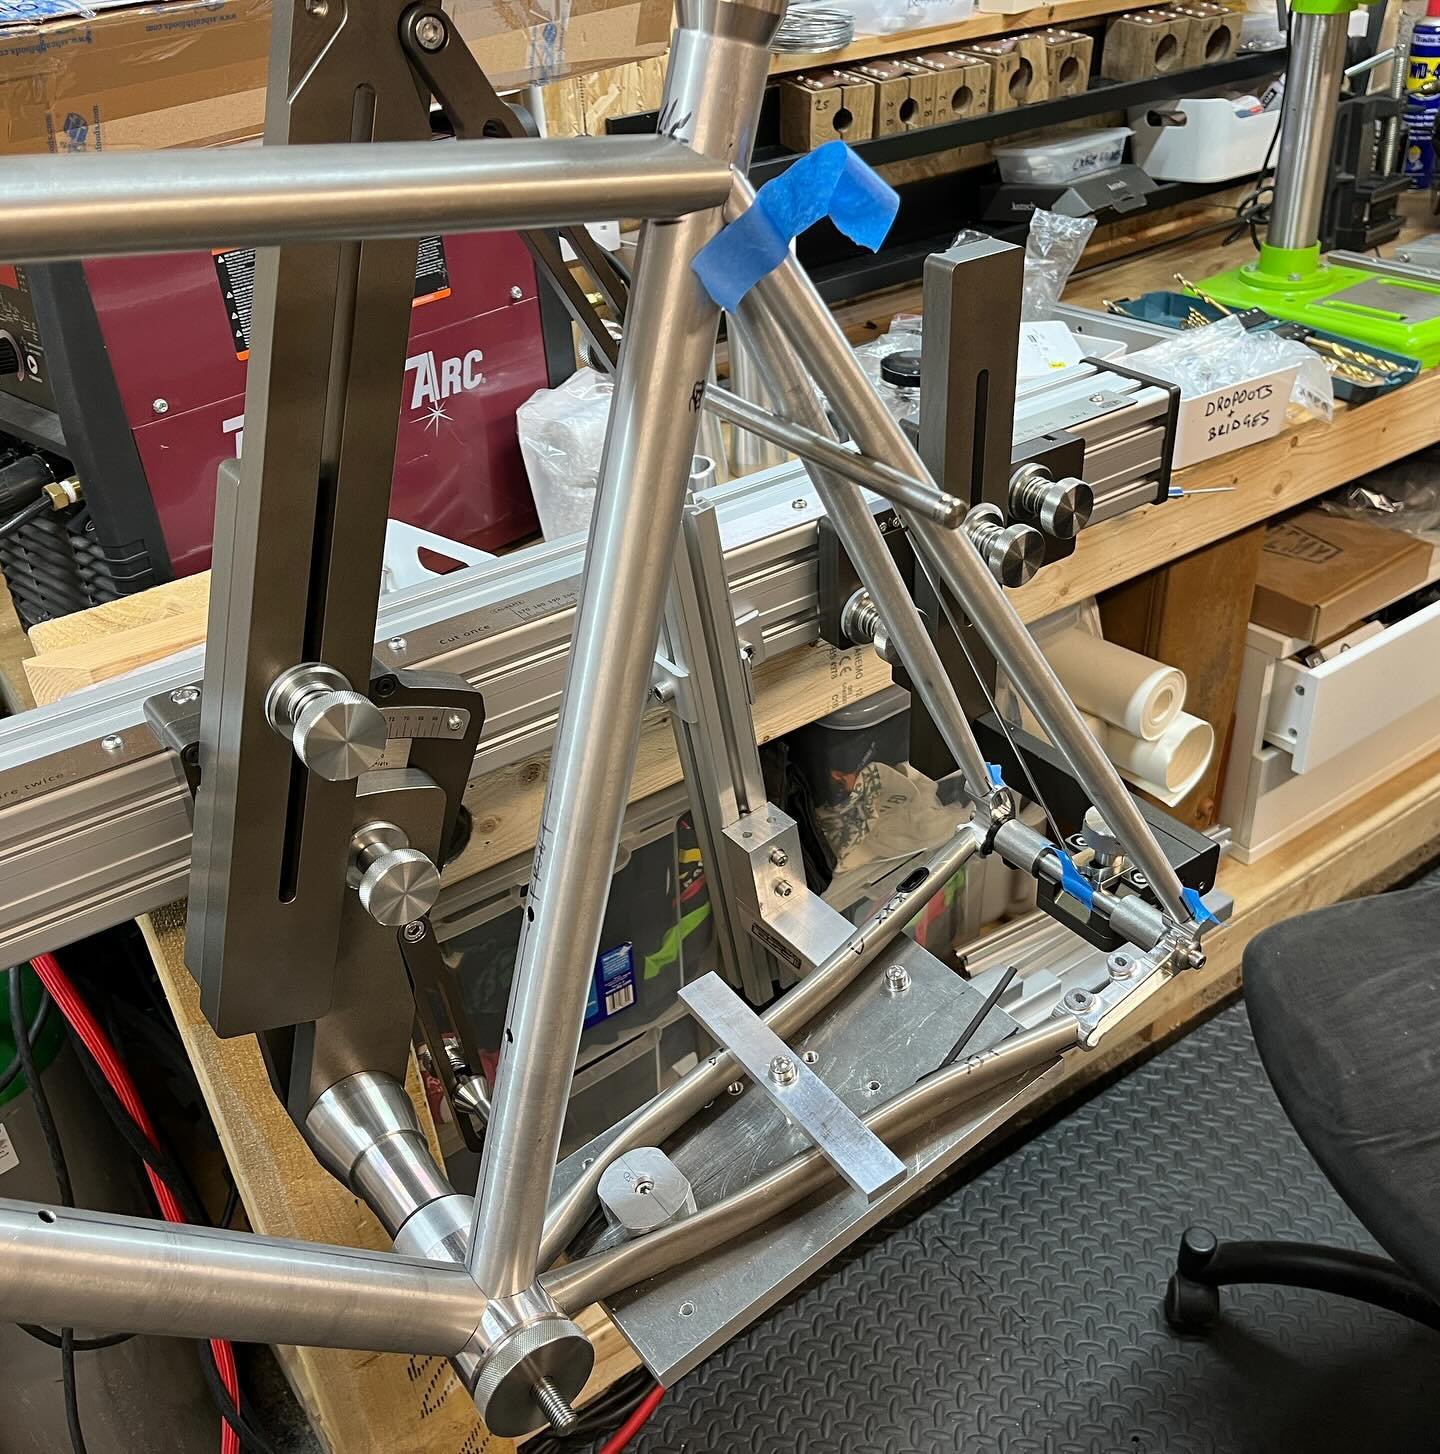 Rear end coming together. Had planned curved stays for a CX build but there was waaaaay too much clearance. Looking forward to stitching together this weekend.